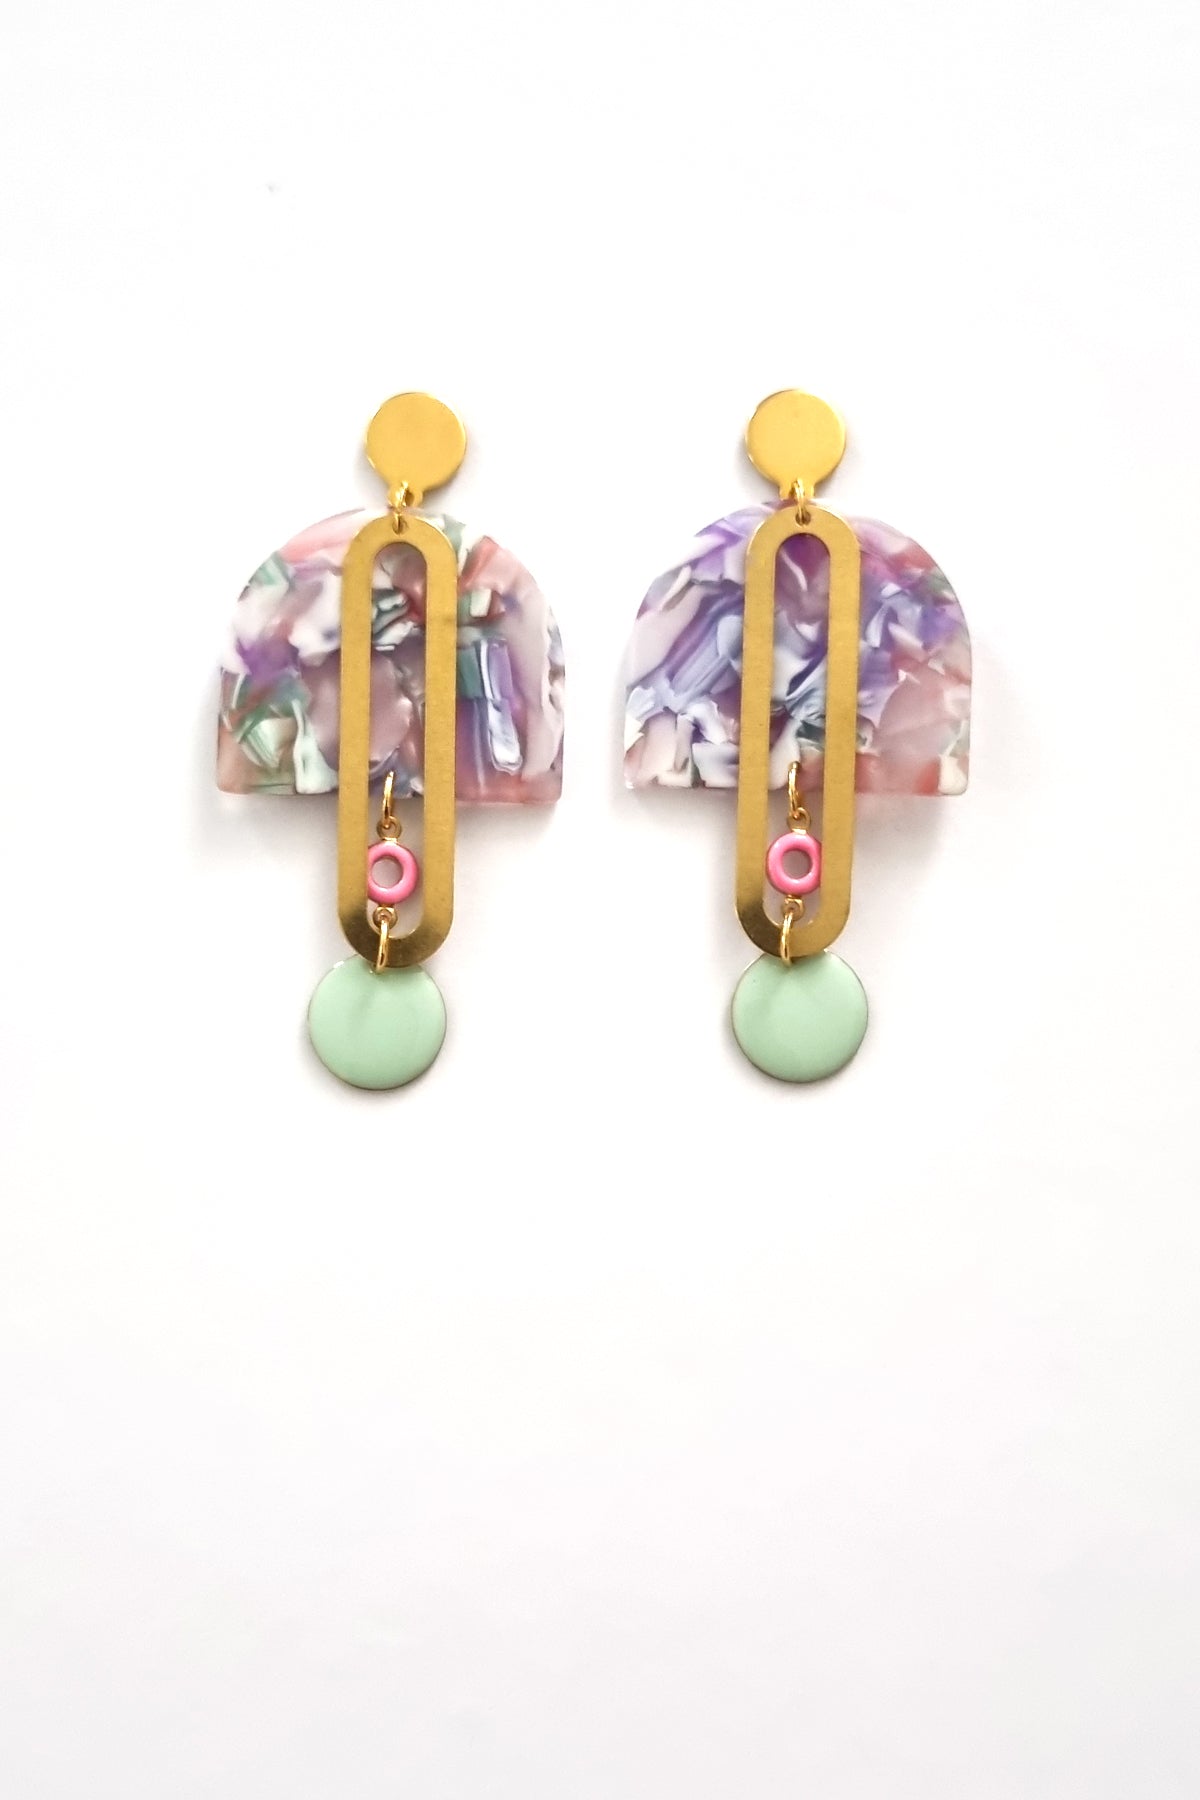 A pair of stud dangle earrings sits against a white background. They feature a mauve and mint multicoloured acrylic arch, an elongated oval brass piece with a small pink enamel connector attaching the acrylic piece to the brass, and at the bottom hangs a mint enamel dot.